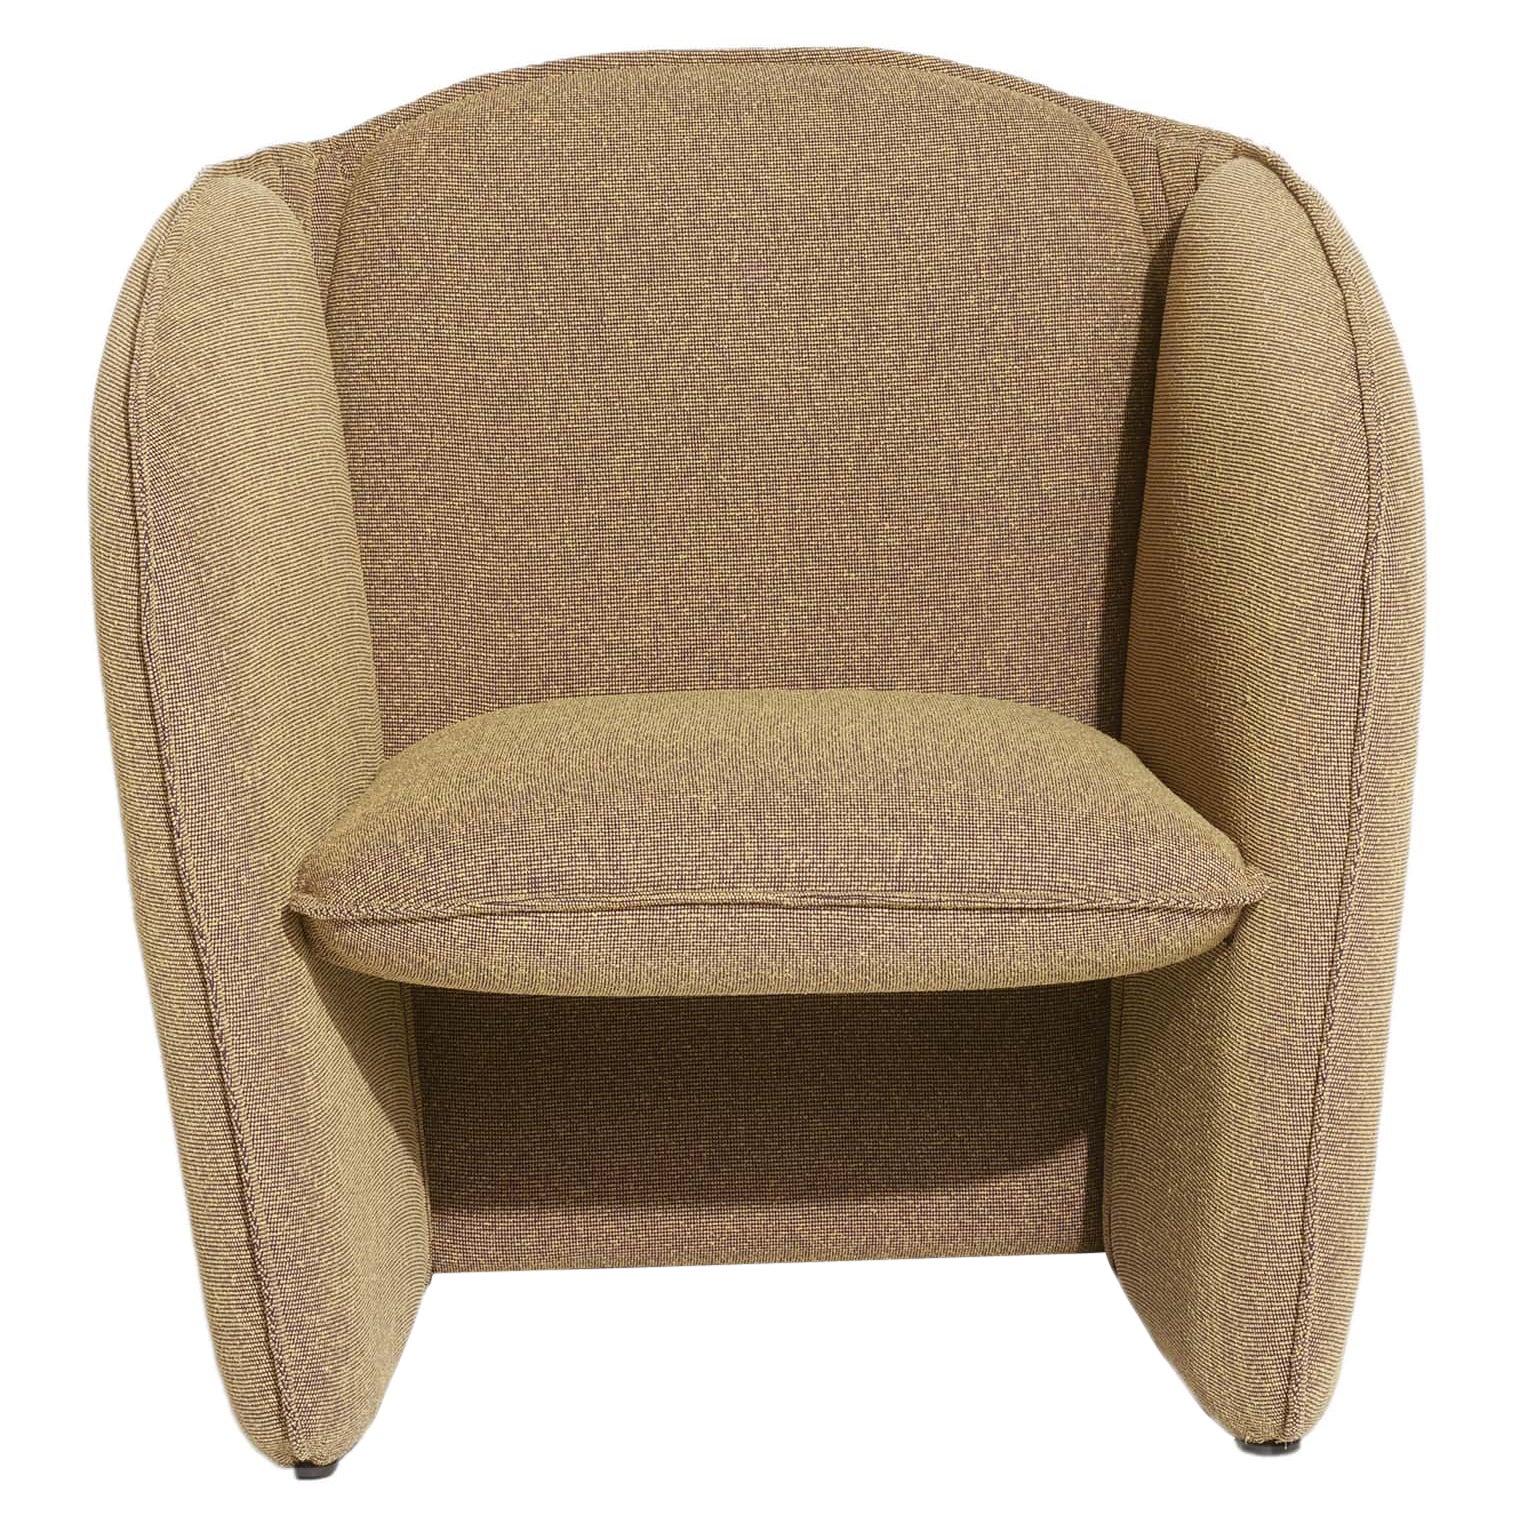 Petite Friture Lily Armchair in Yellow - Plum by Färg & Blanche, 2022 For Sale